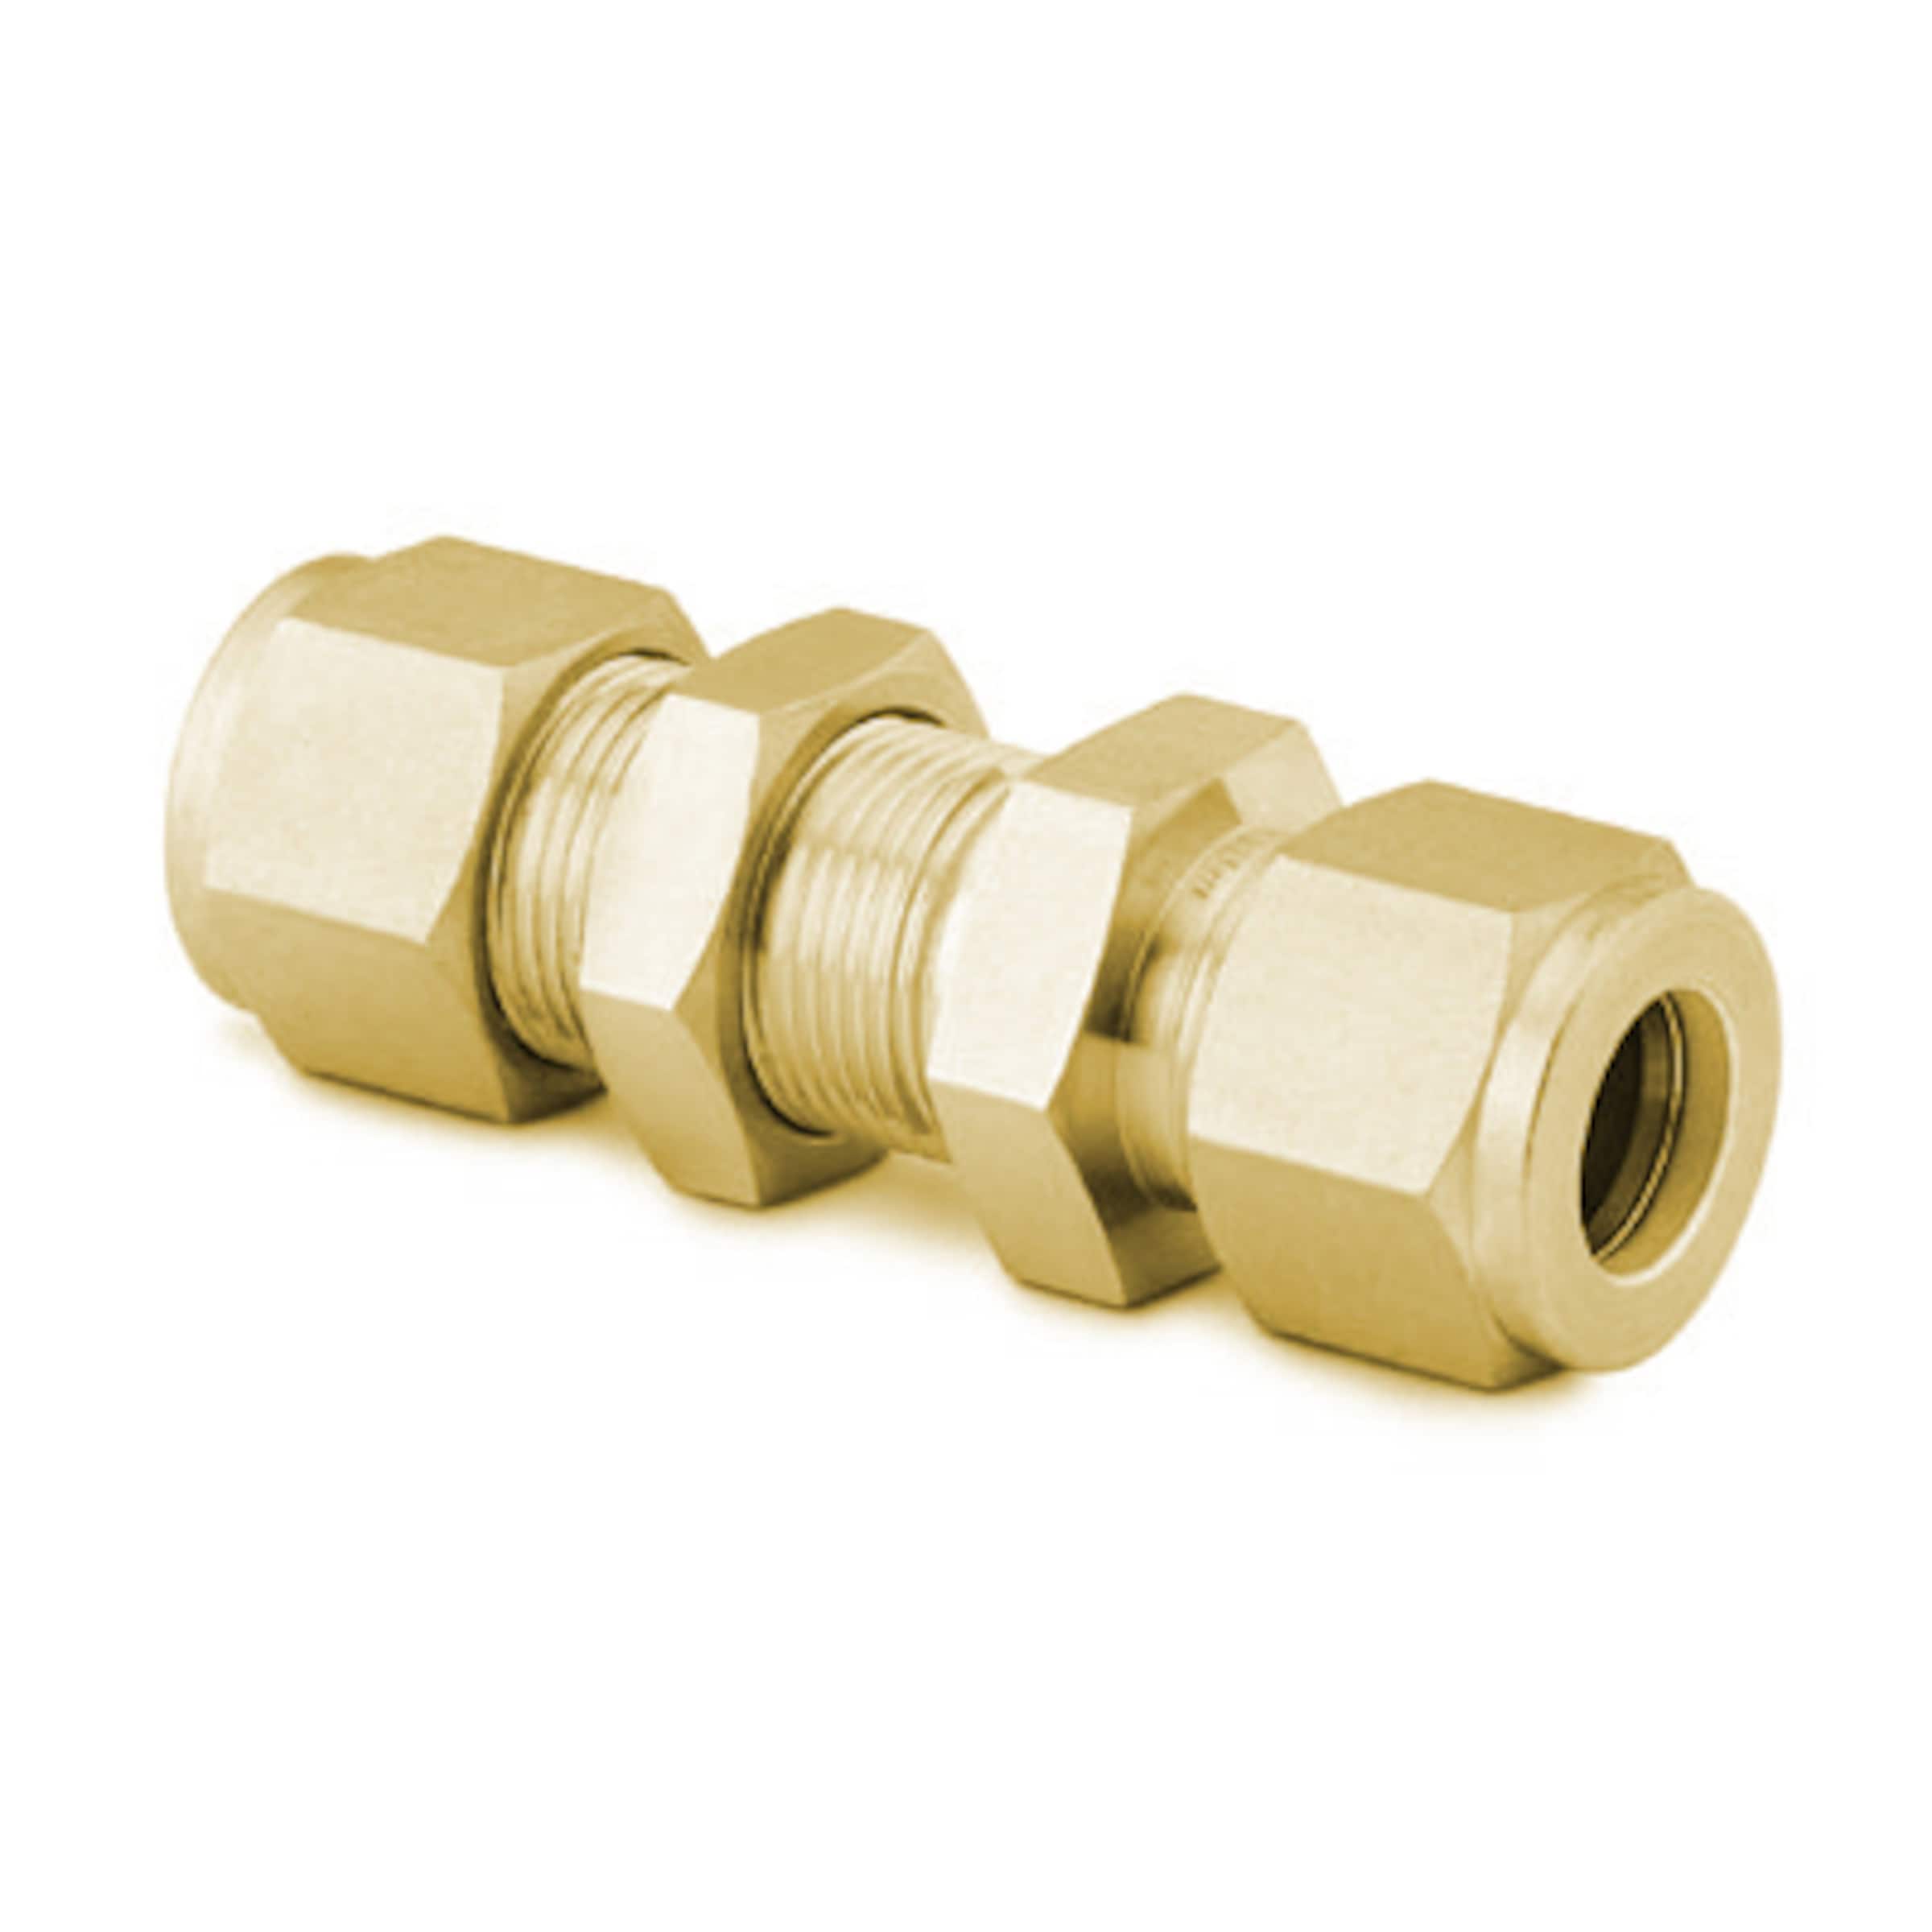 Brass Swagelok Tube Fitting, Union Elbow, 16 mm Tube OD, Unions, Tube  Fittings and Adapters, Fittings, All Products